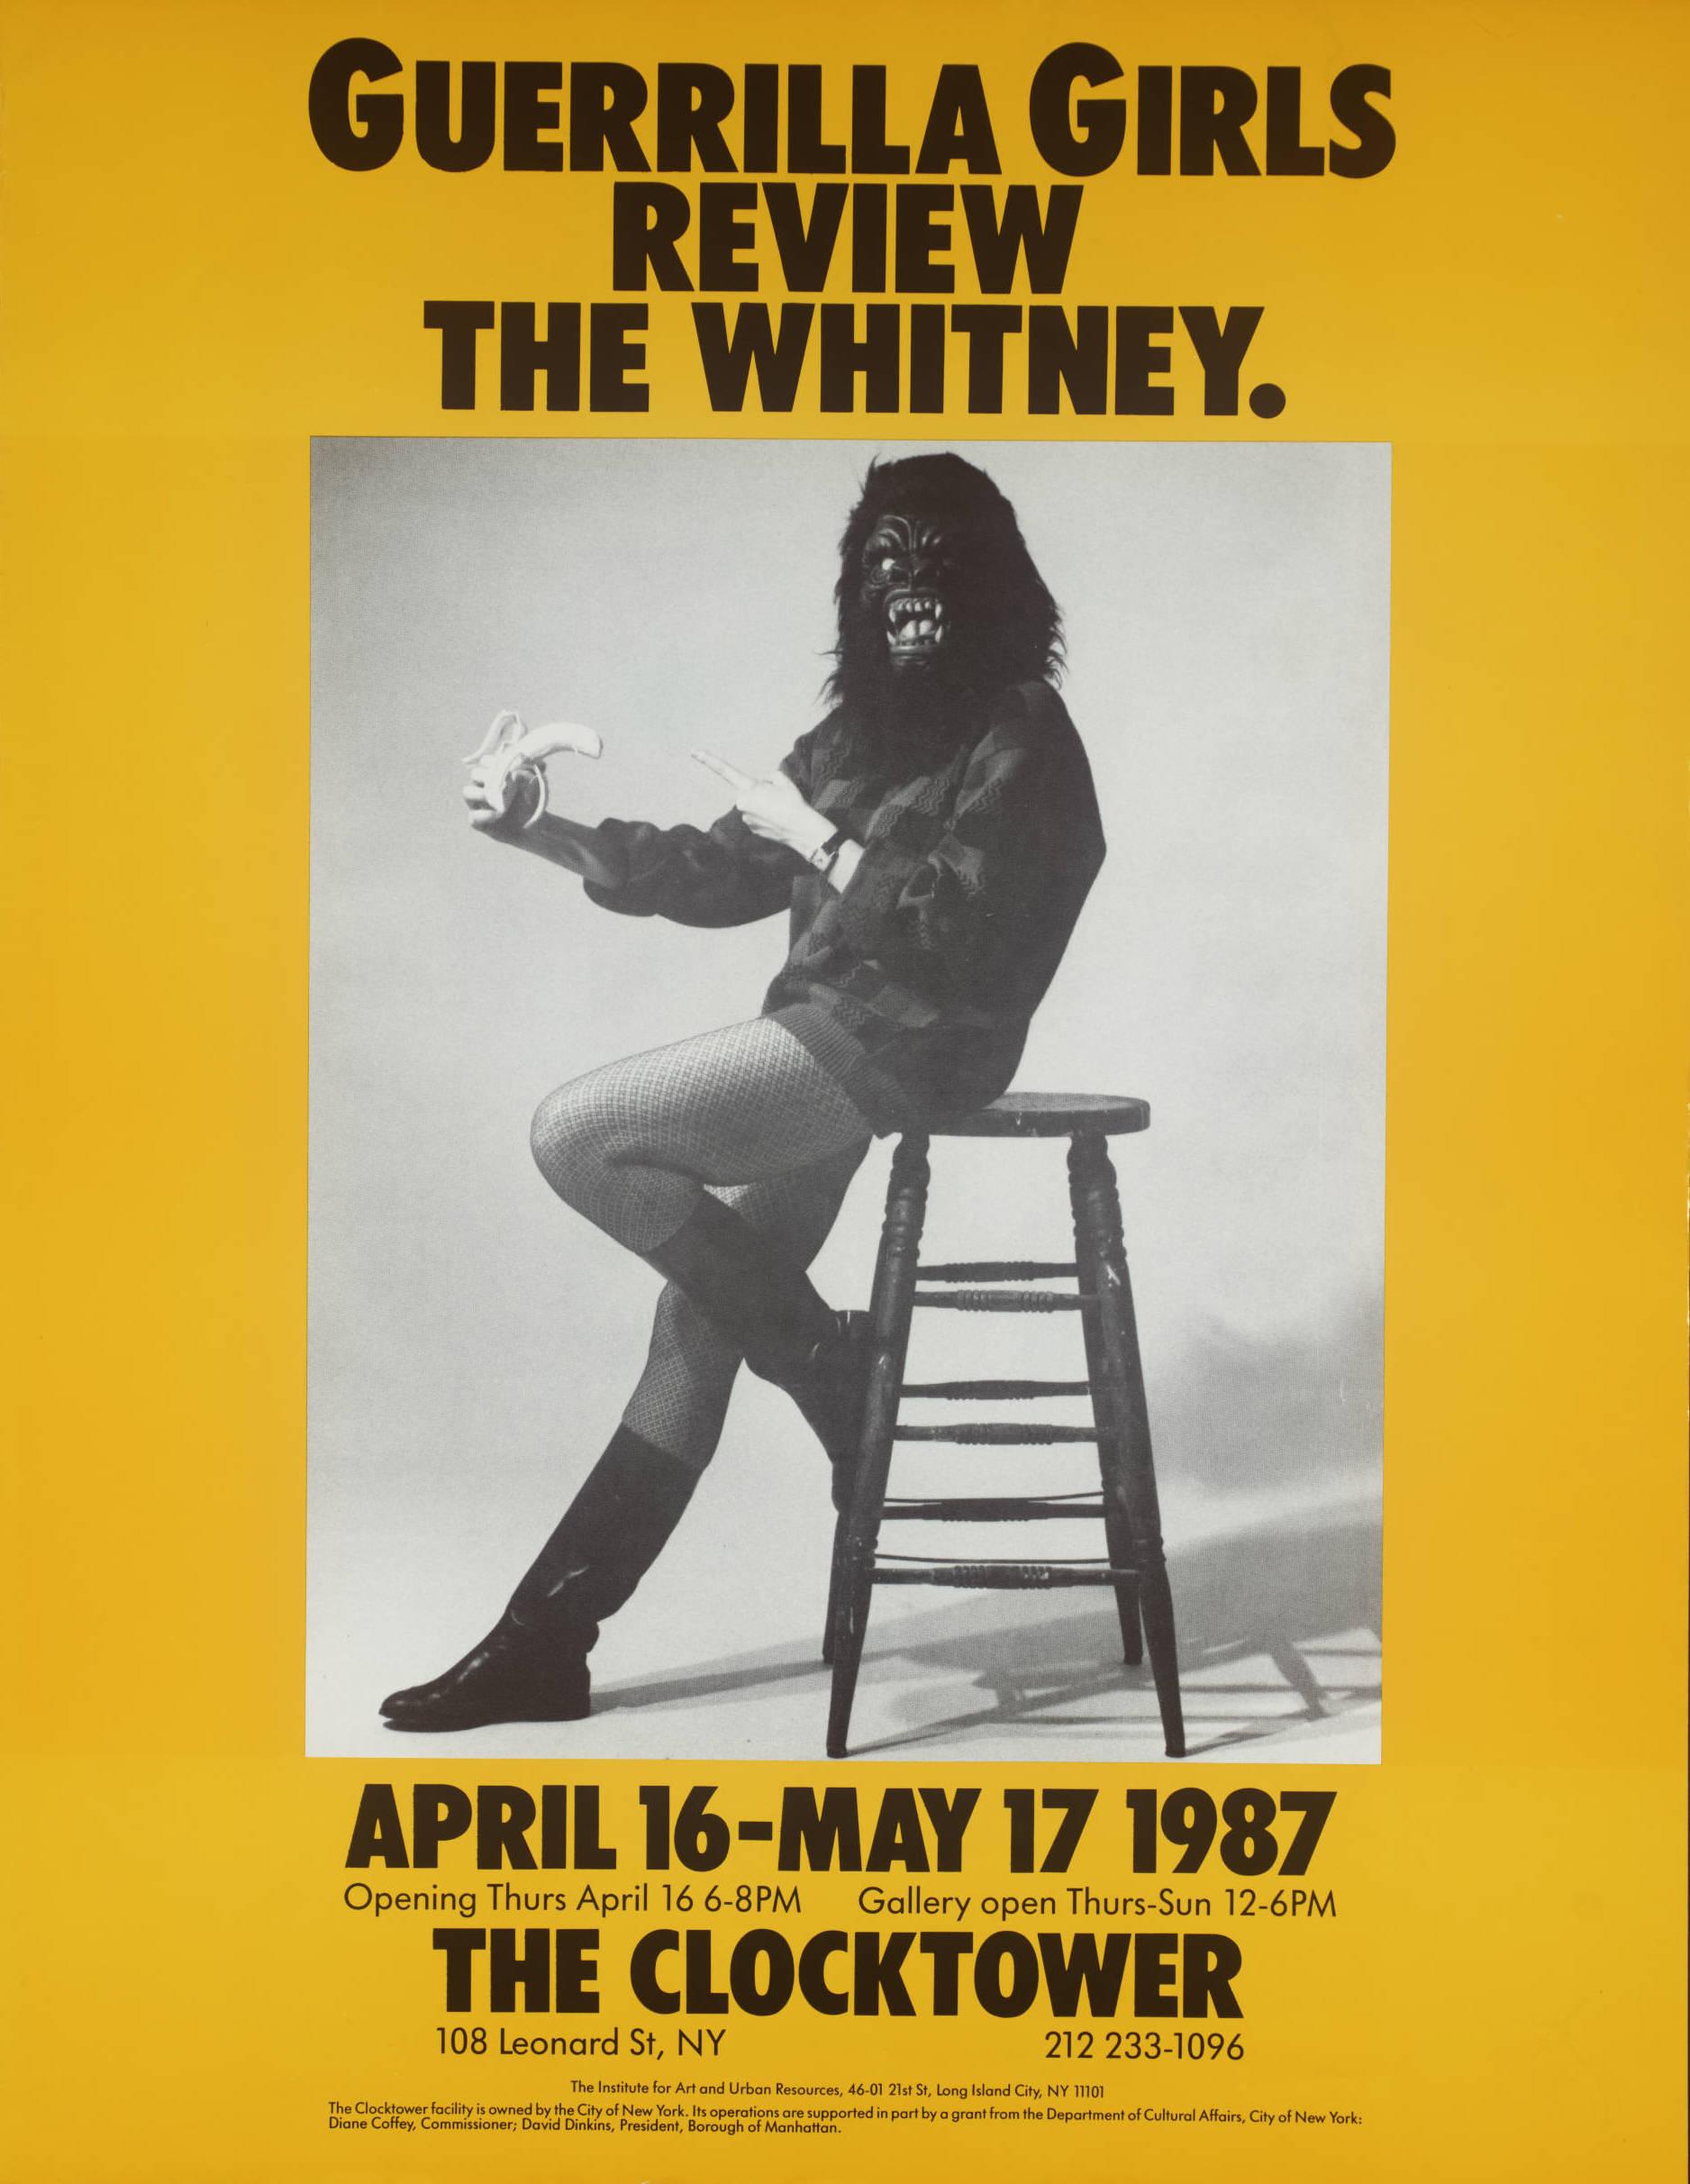 P78798: Guerrilla Girls Review The Whitney